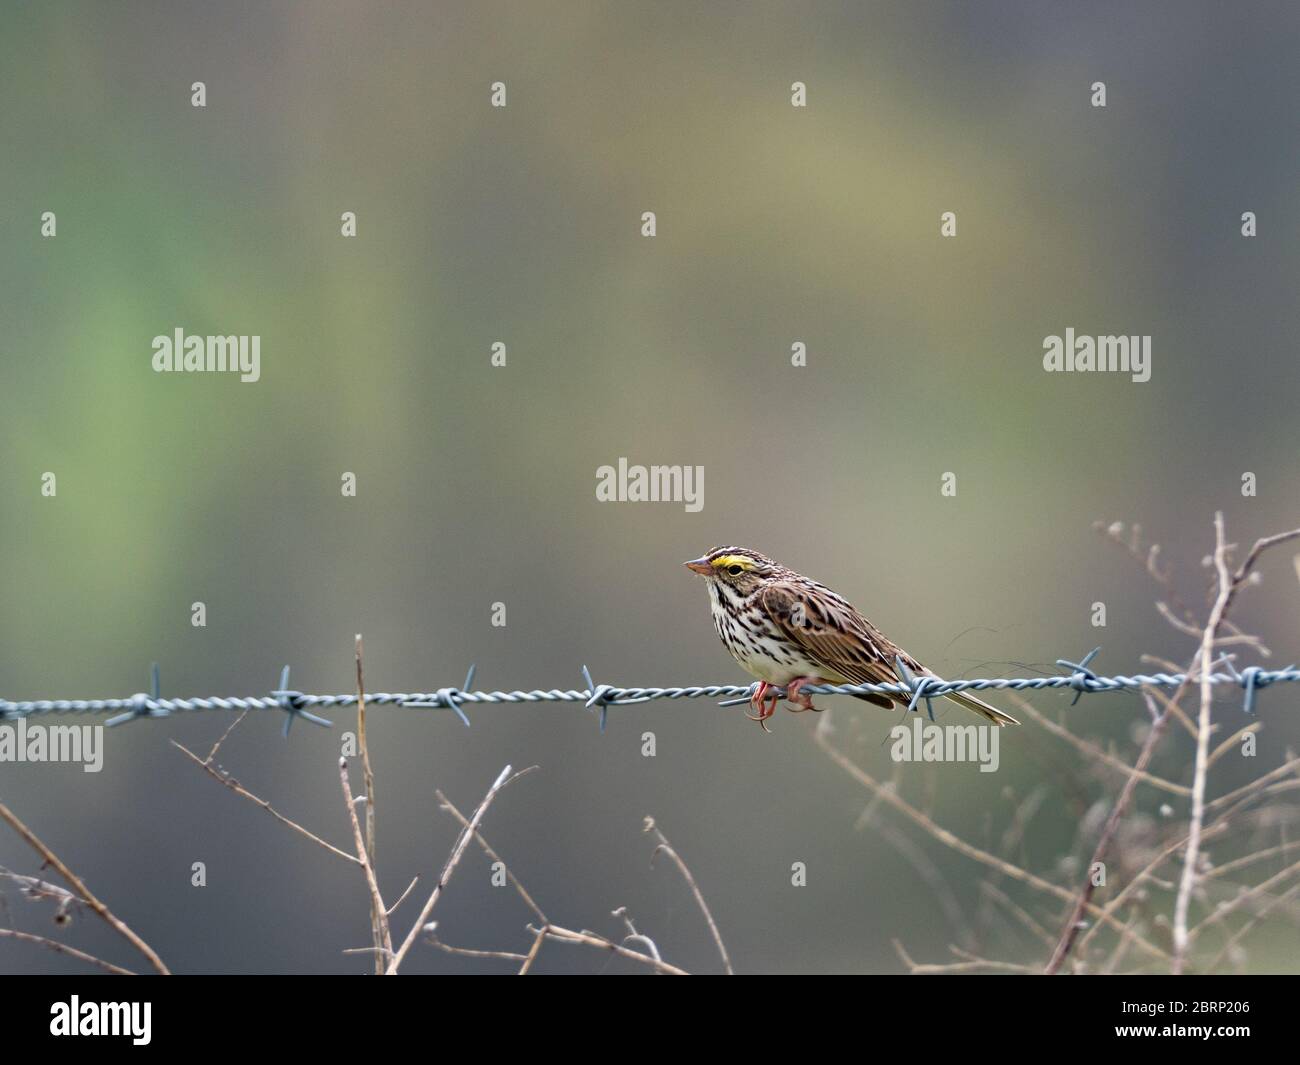 Savannah sparrow, Passerculus sandwichensis, on a fence in Amish Country, Ohio Stock Photo